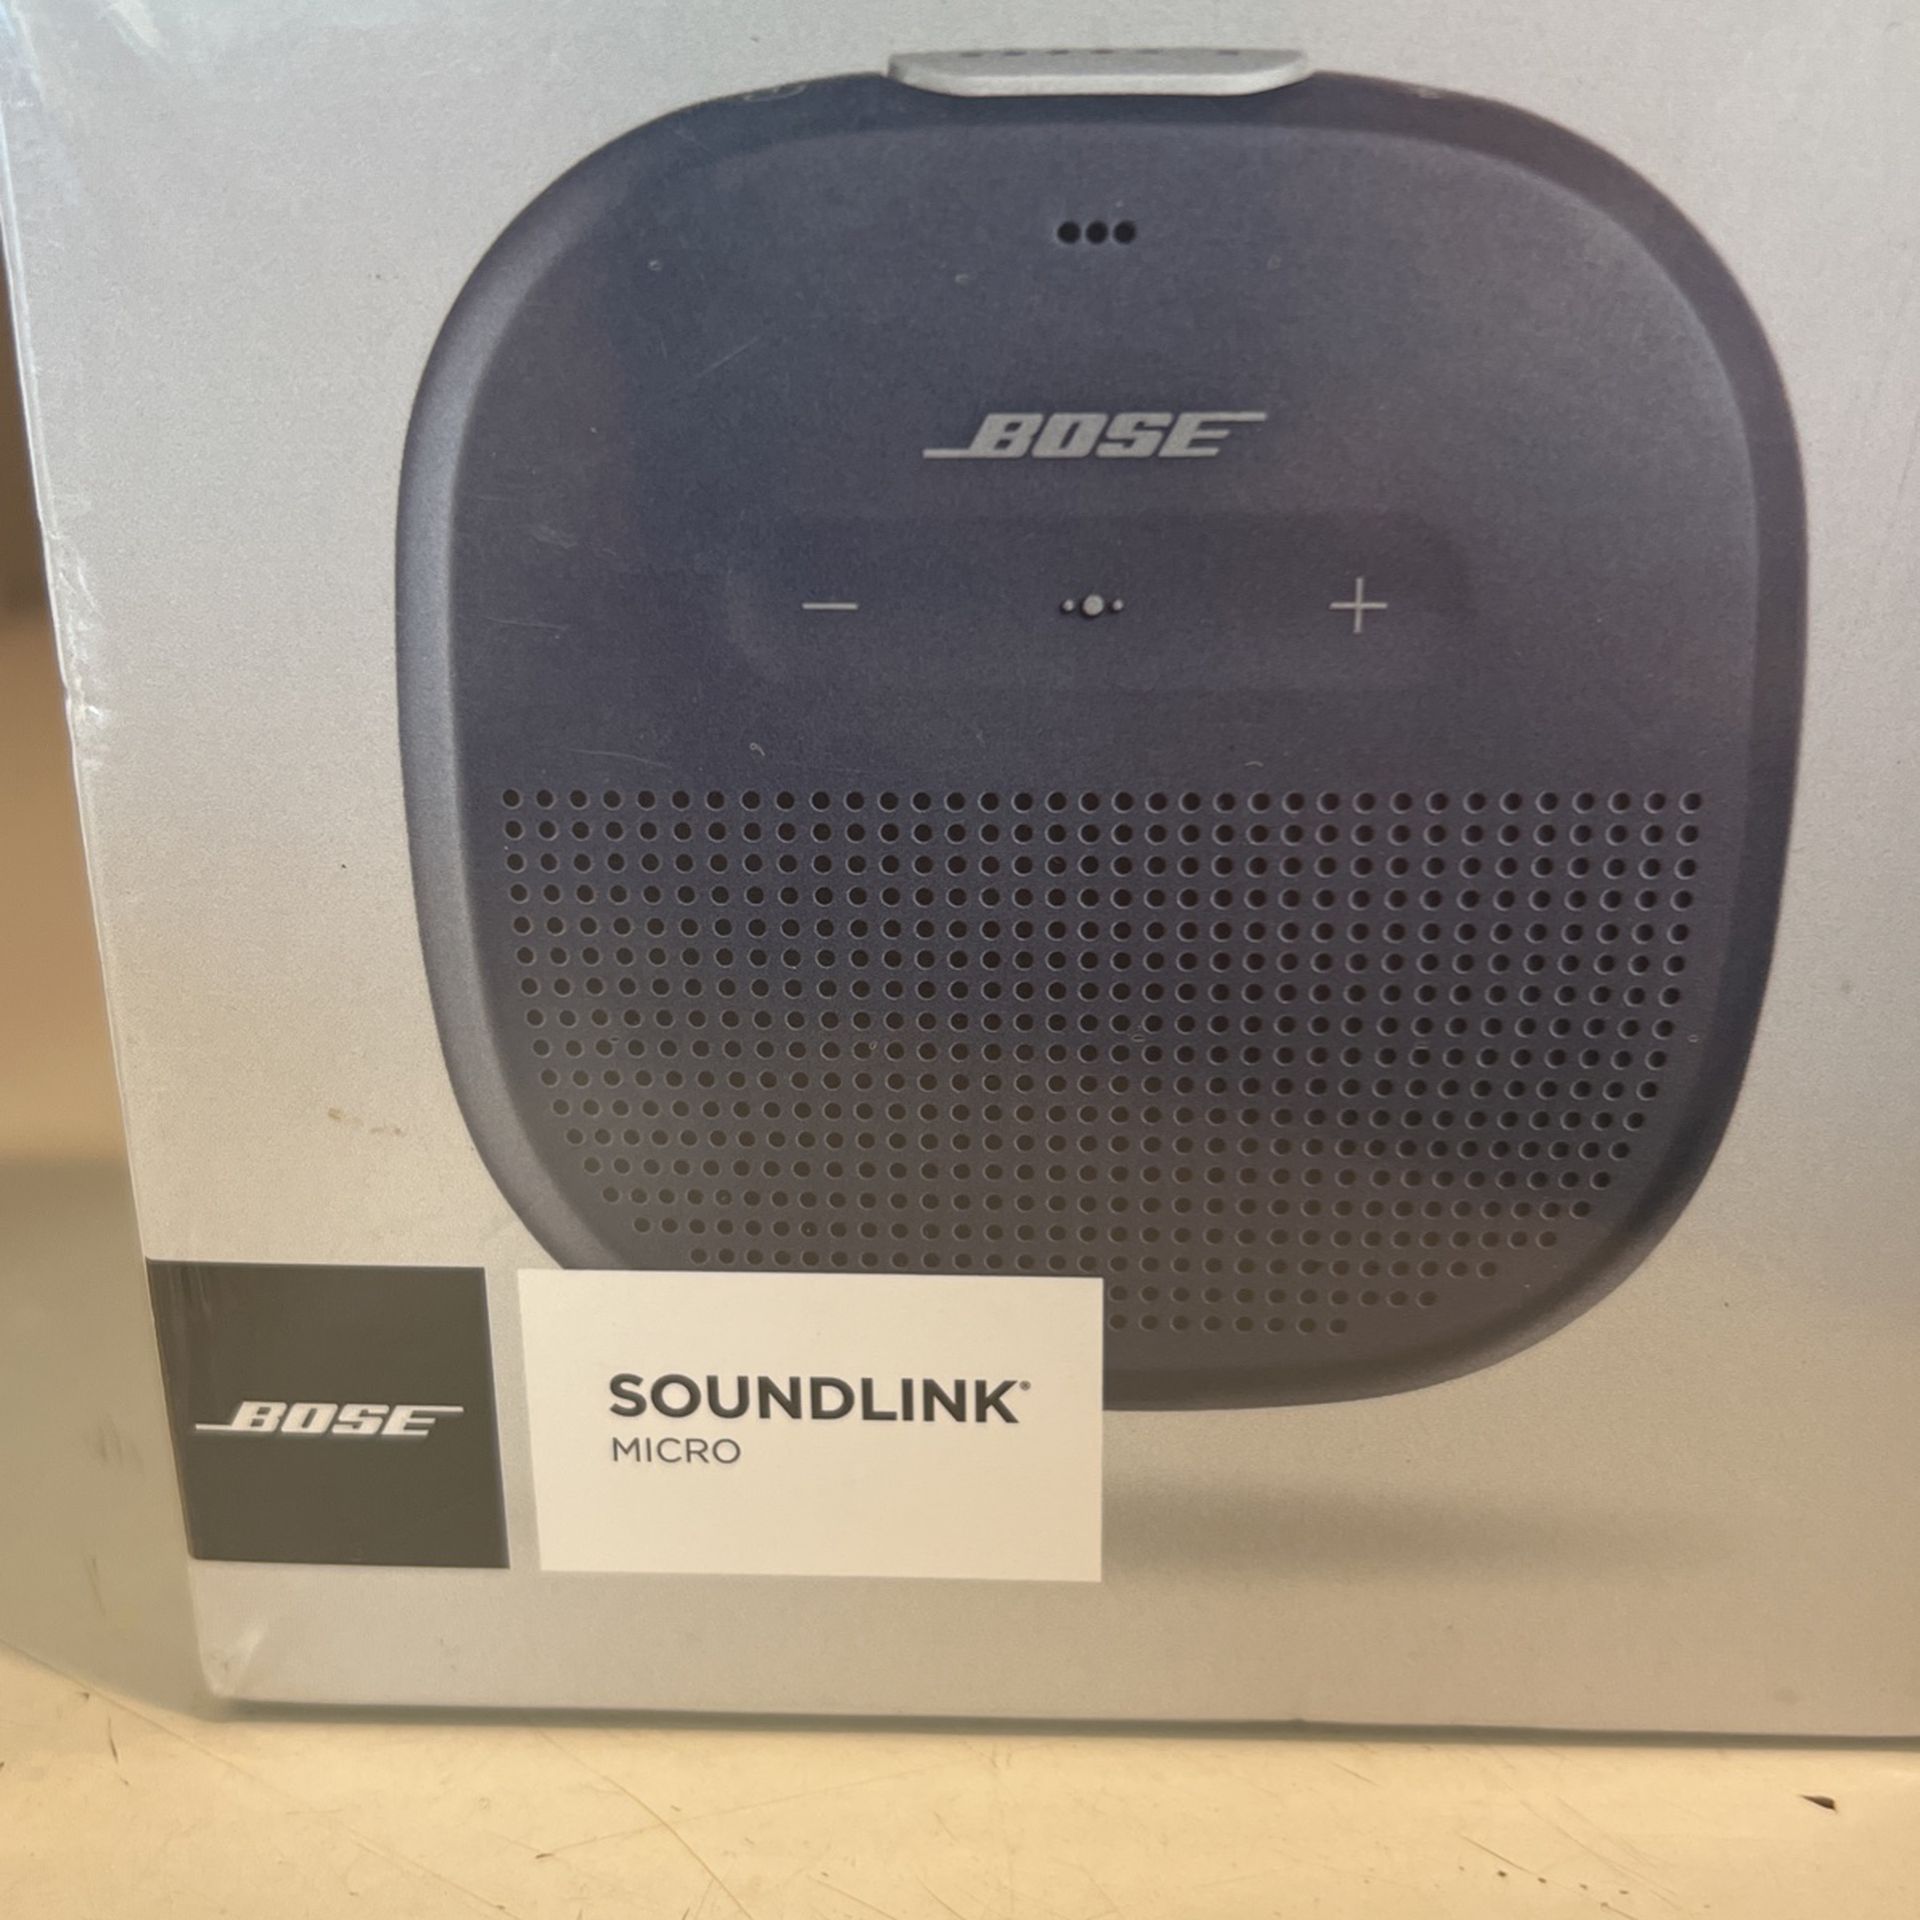 NEW - Bose SoundLink Micro Bluetooth Rechargable Speaker for